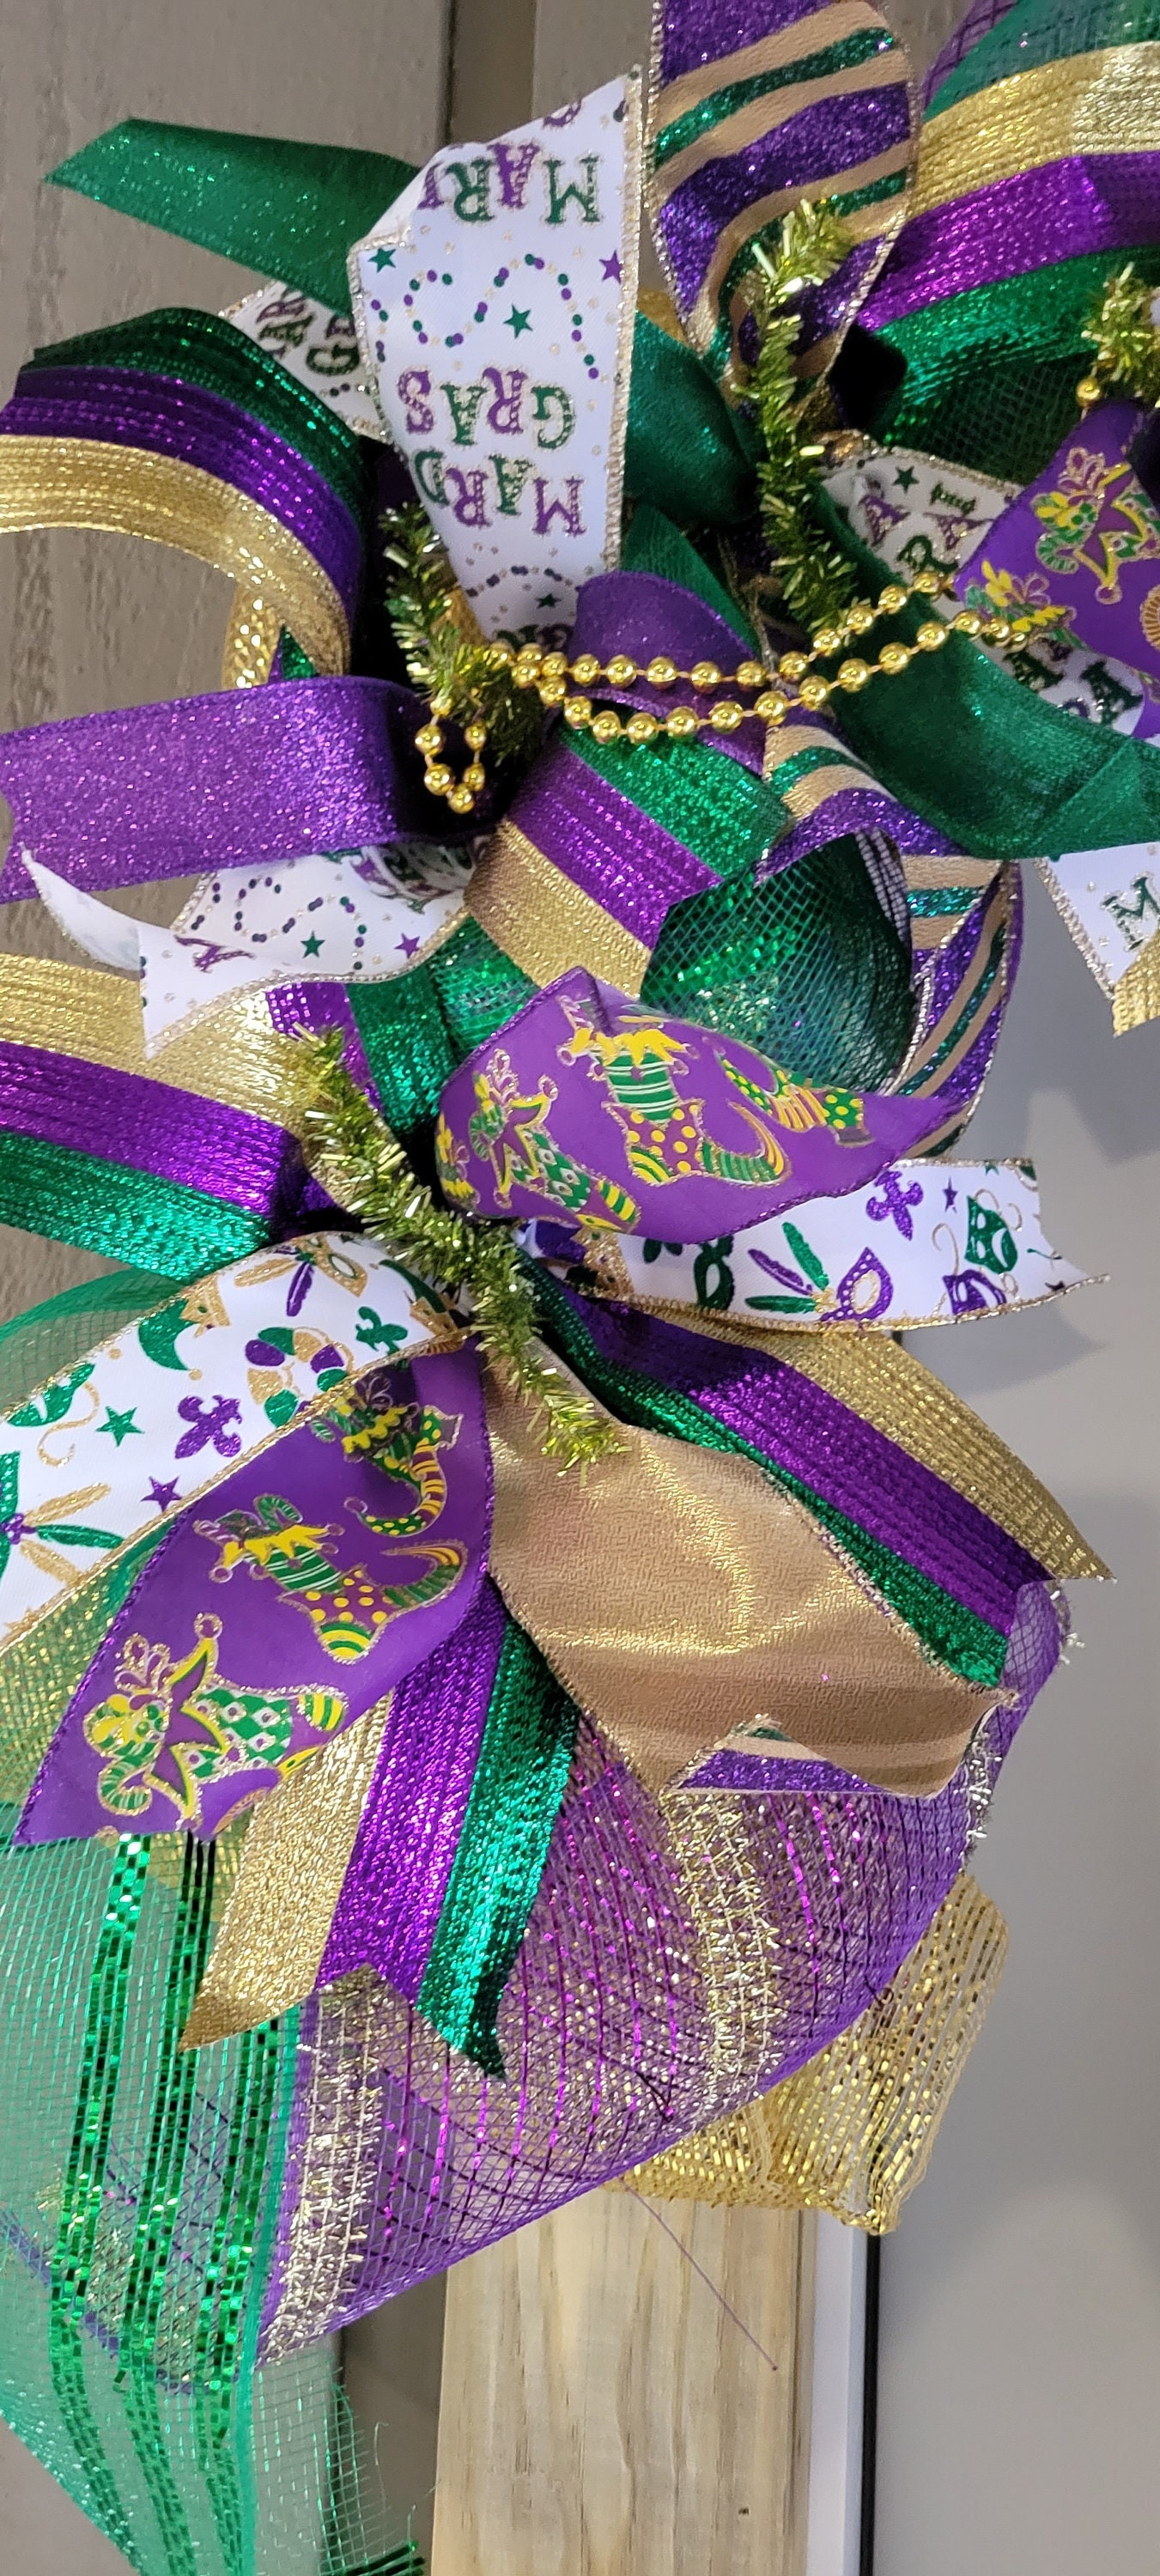 Mardi Gras Ribbon 1.5 x 5 Yards, Purple, Green and Yellow, Fat Tuesday,  Carnival, Spring, Holiday Garland, Gifts, Wrapping, Bow - AliExpress